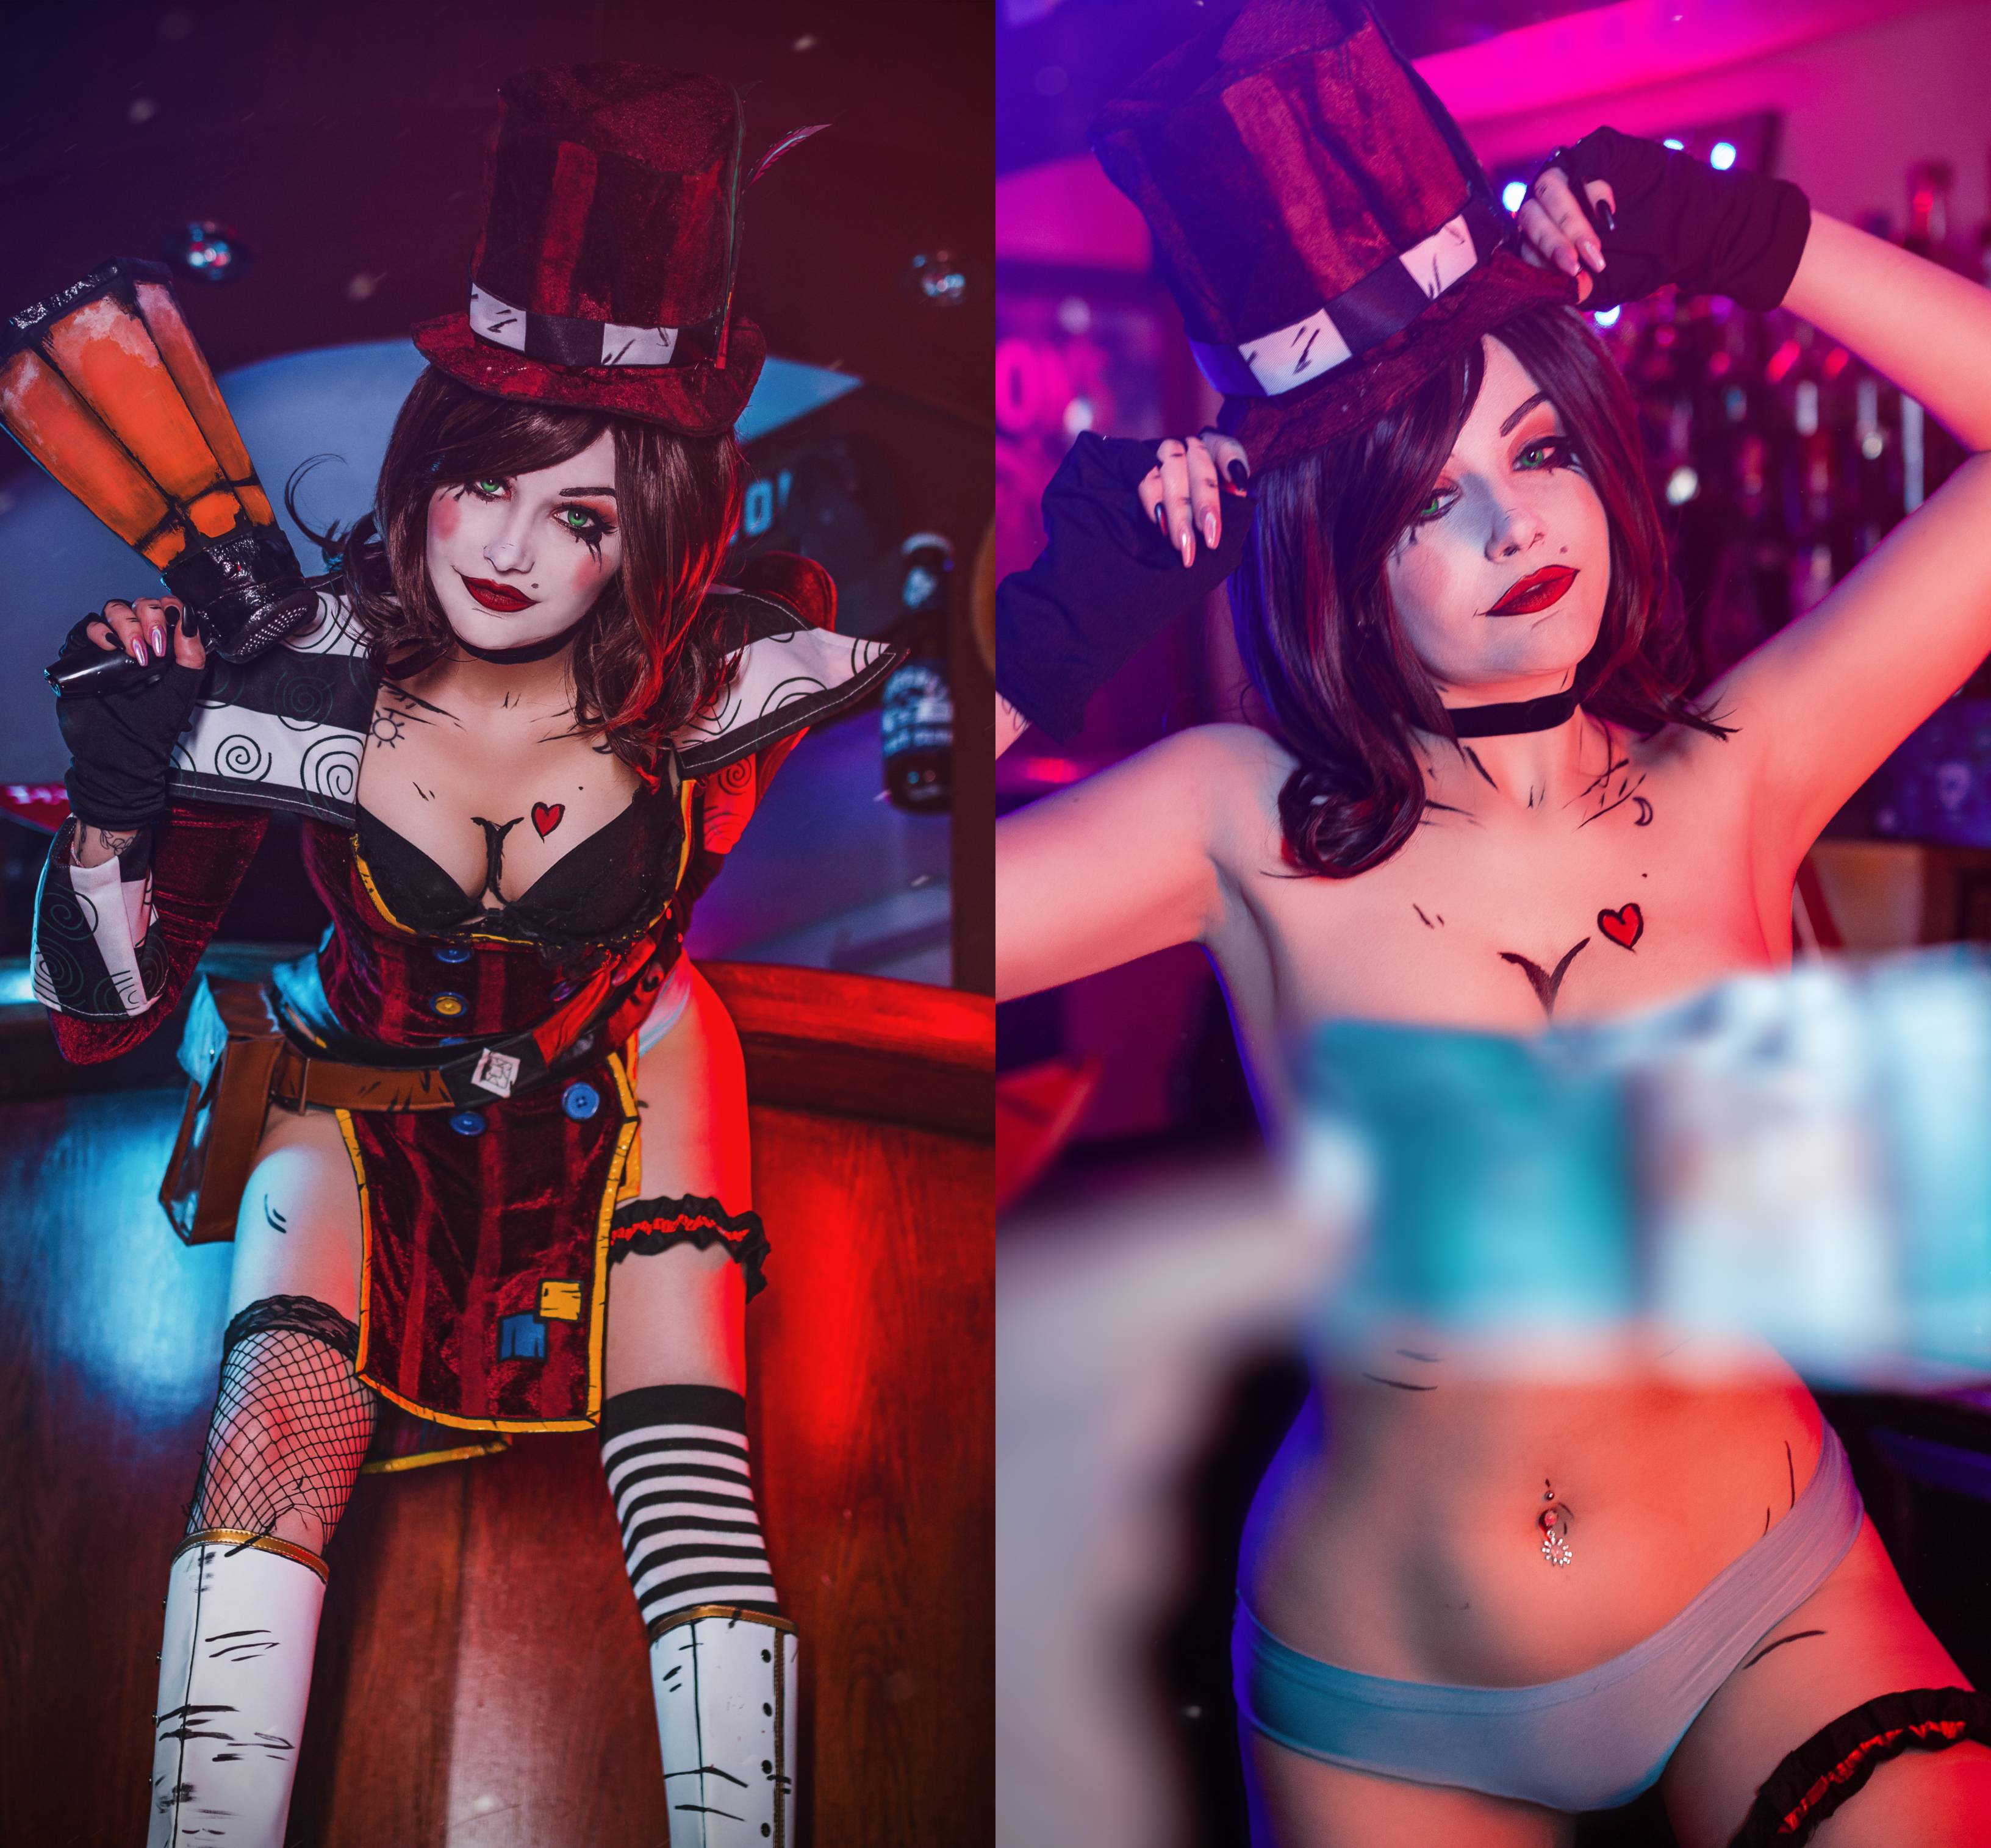 Mad Moxxi Anime Porn - Self] Borderlands - Mad Moxxi after hours in her bar~ Which do you prefer?  by Ri Care Foto PornÃ´ - EPORNER